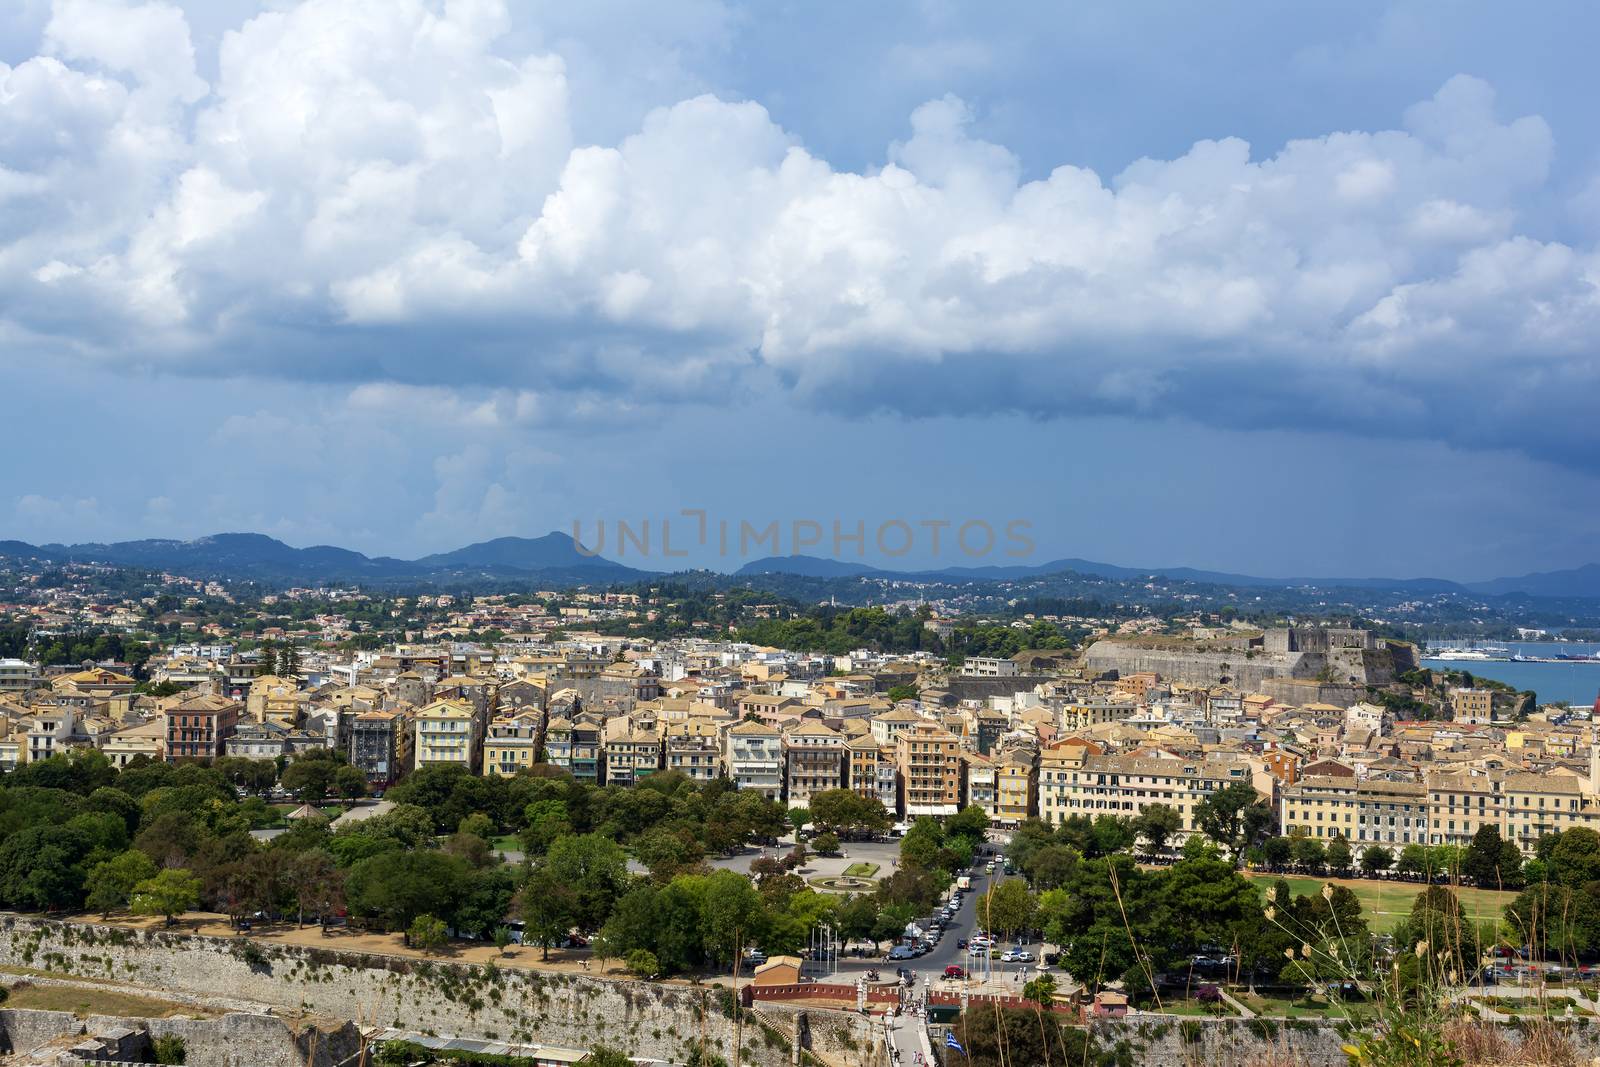 A picturesque view of the city of Corfu from the fortress of the Corfu town in Greece.